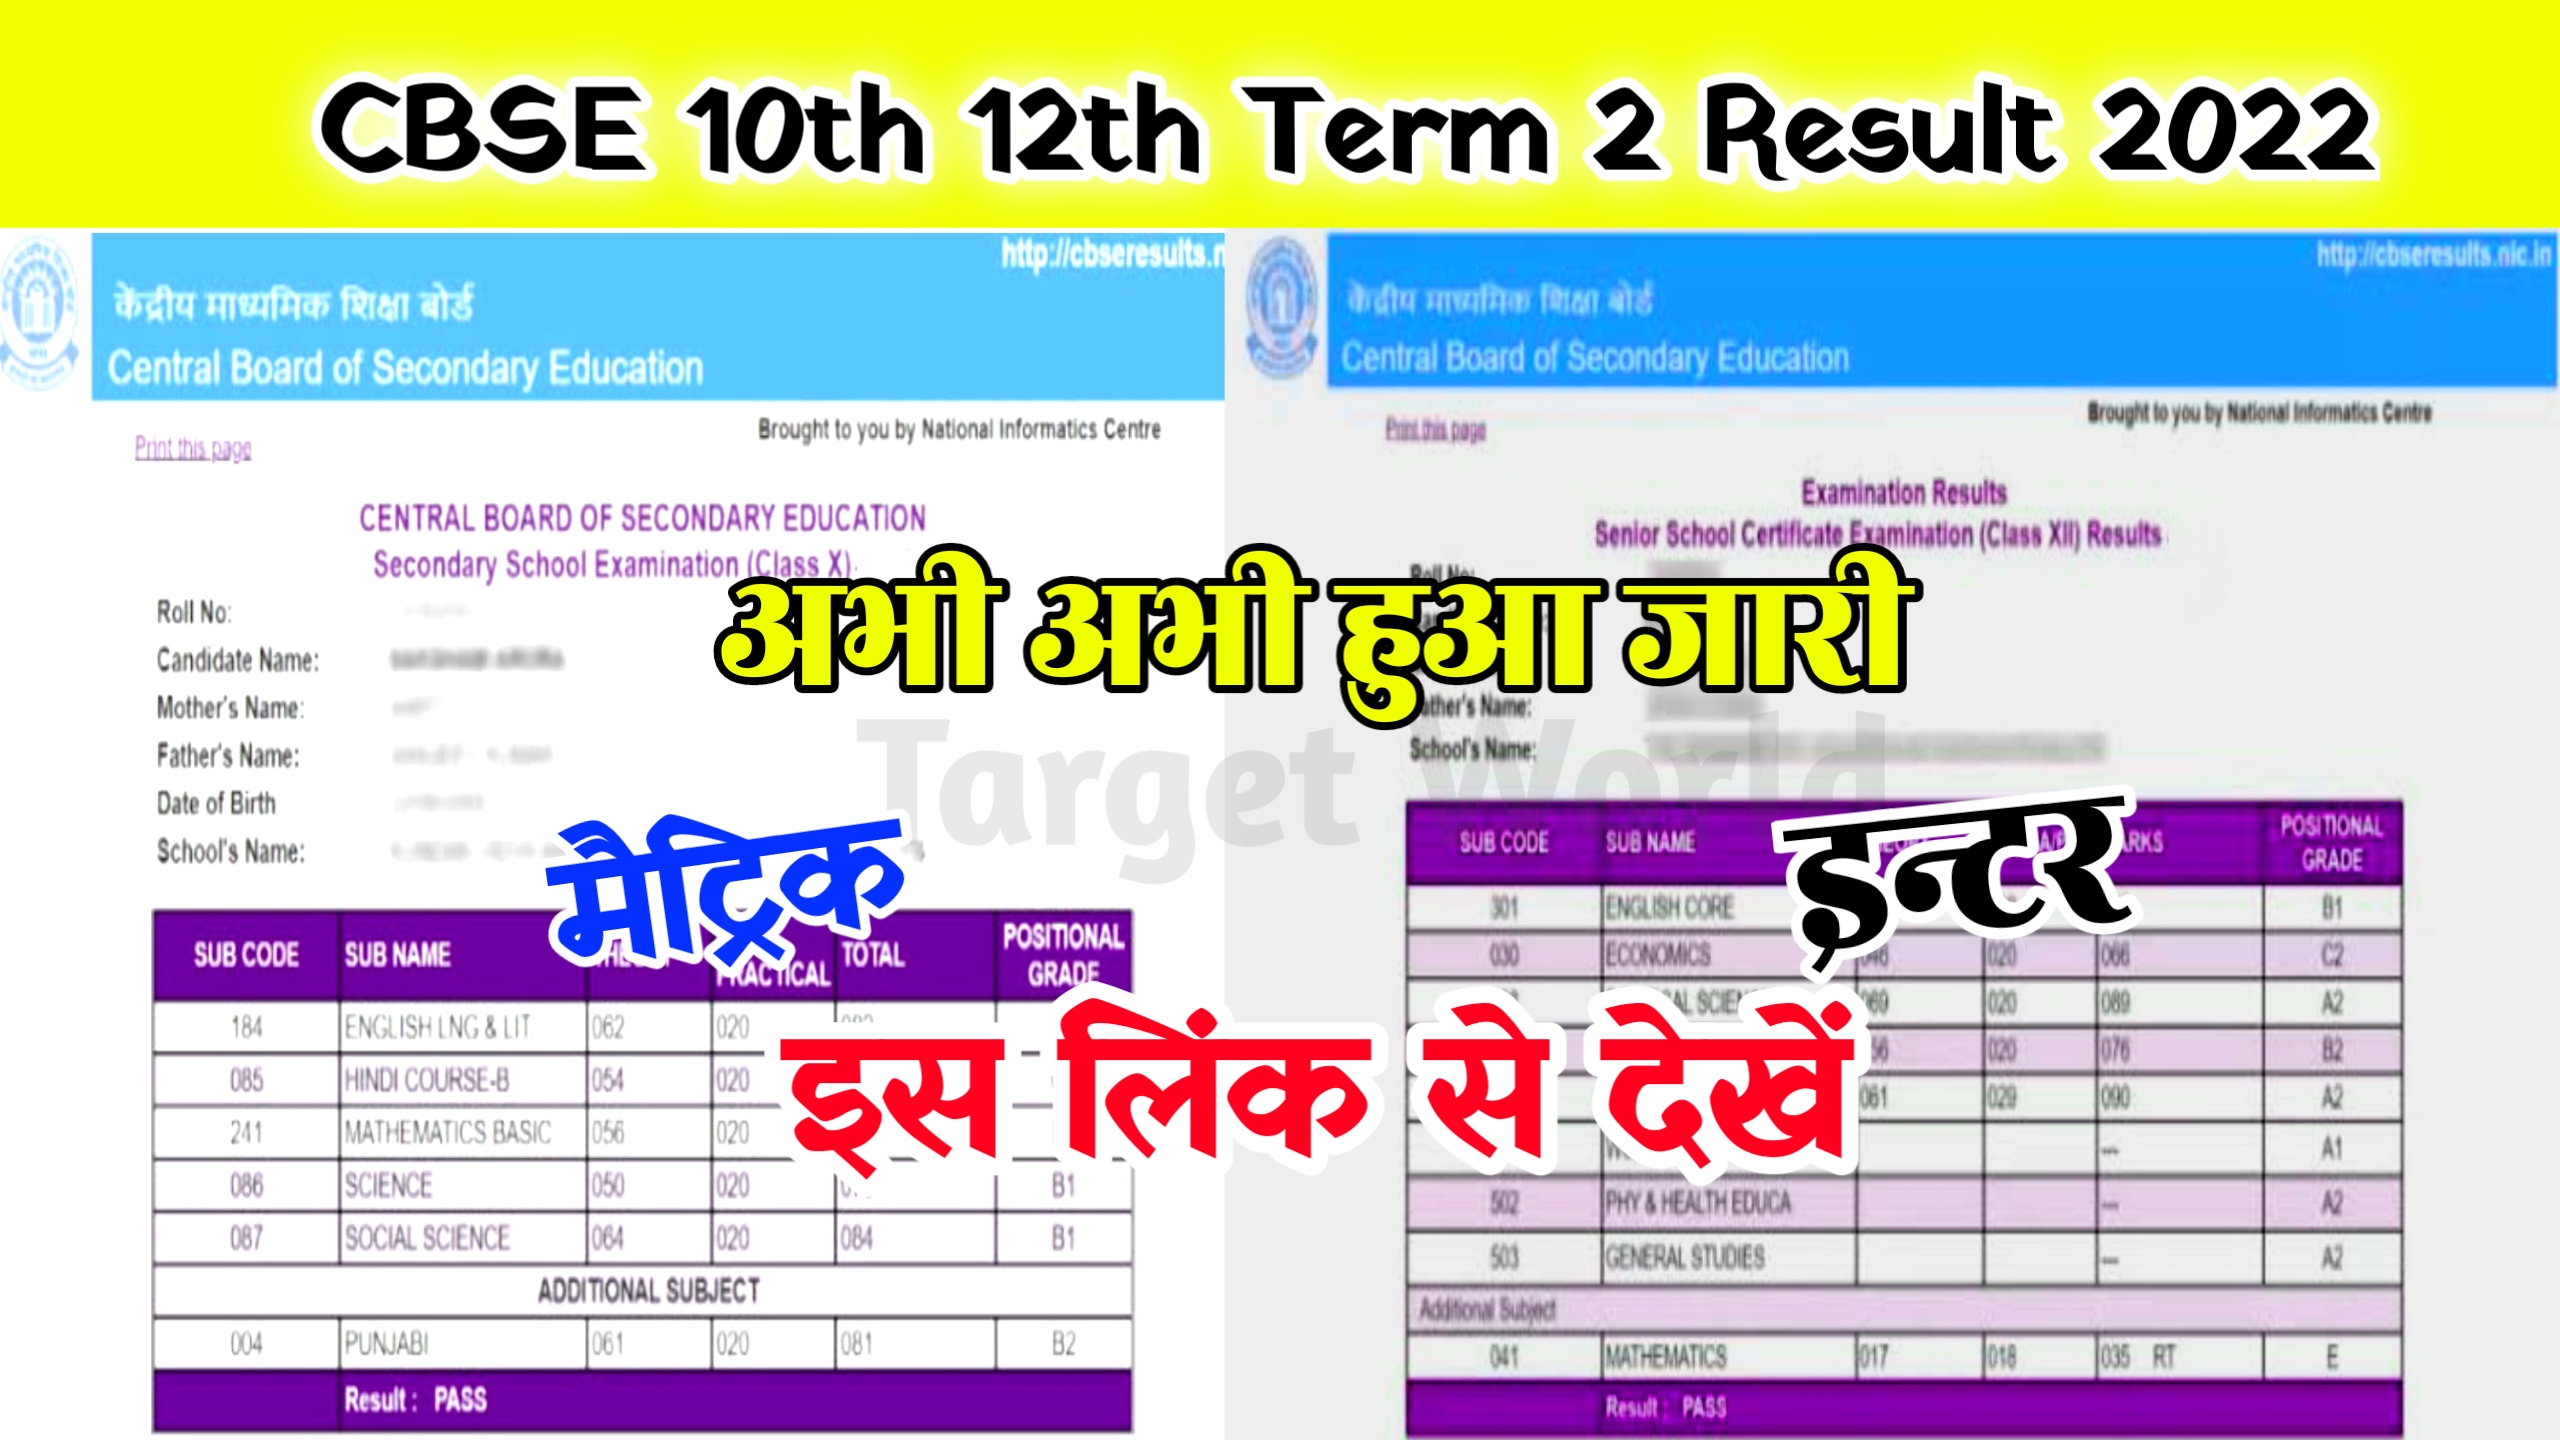 CBSE Term 2 10th 12th Result 2022 Download Link : Scorecard Check Now @cbseresults.nic.in